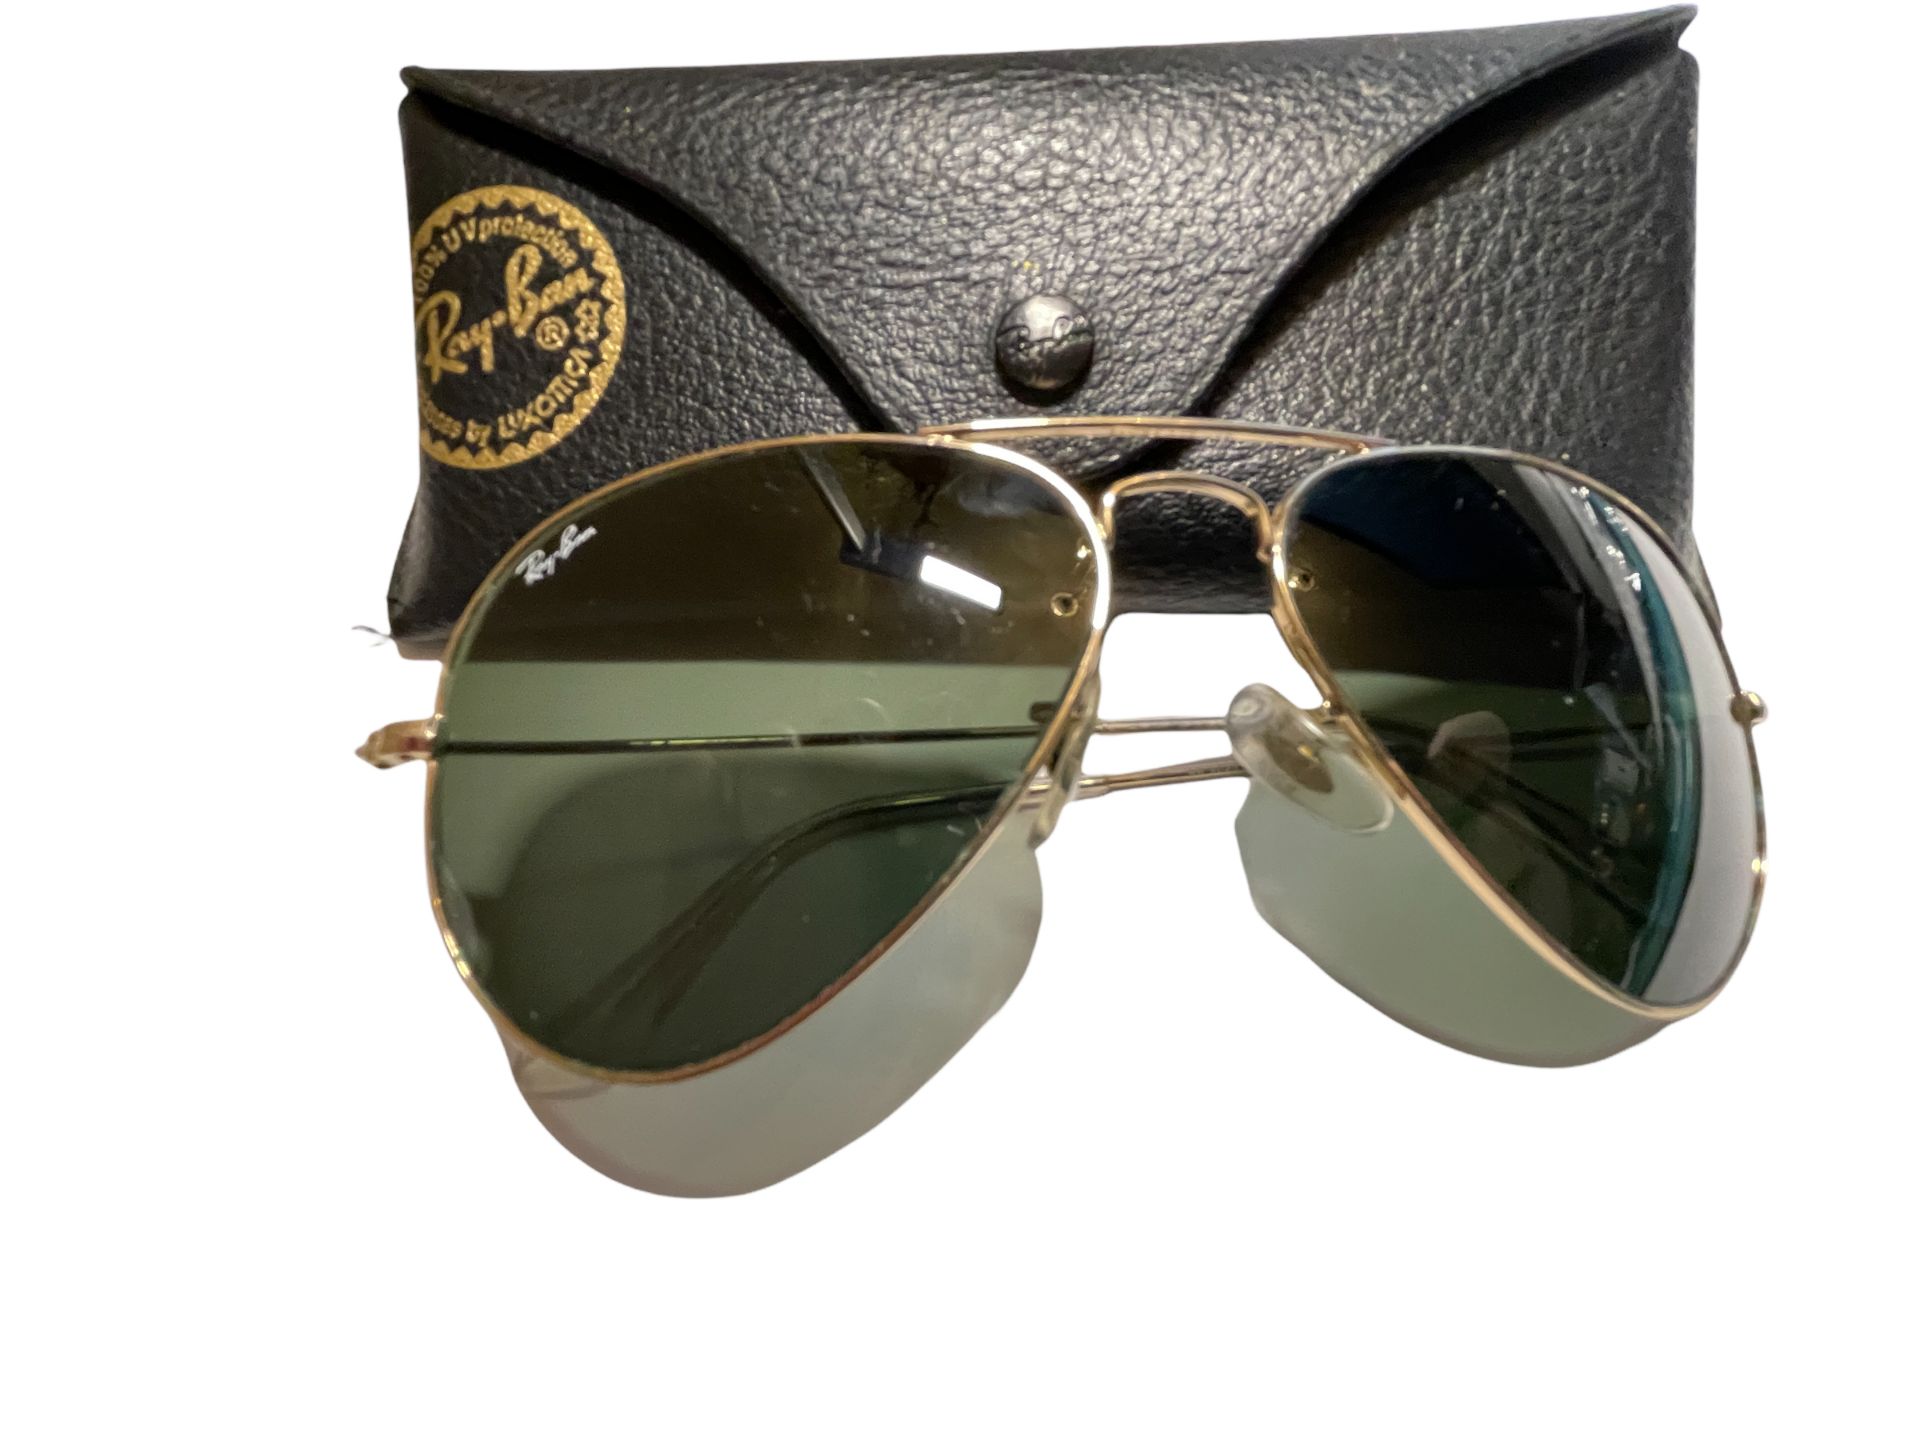 Lost Ray Ban Aviator Sunglasses with case on our private jet charter.